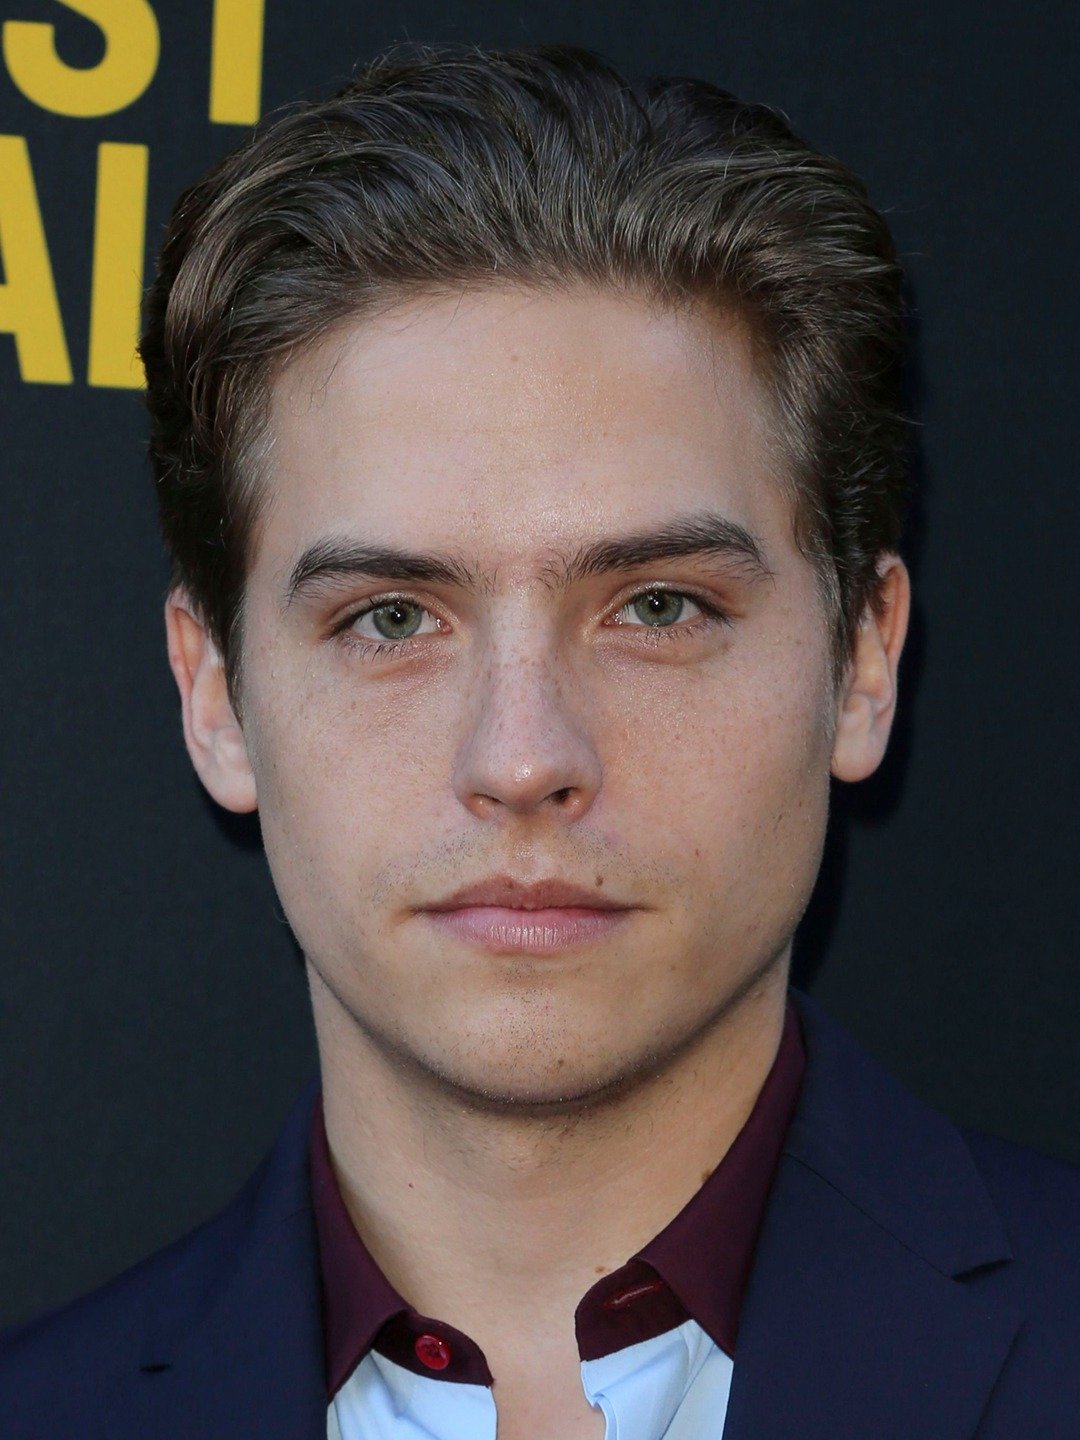 Dylan Sprouse - Wikipedia